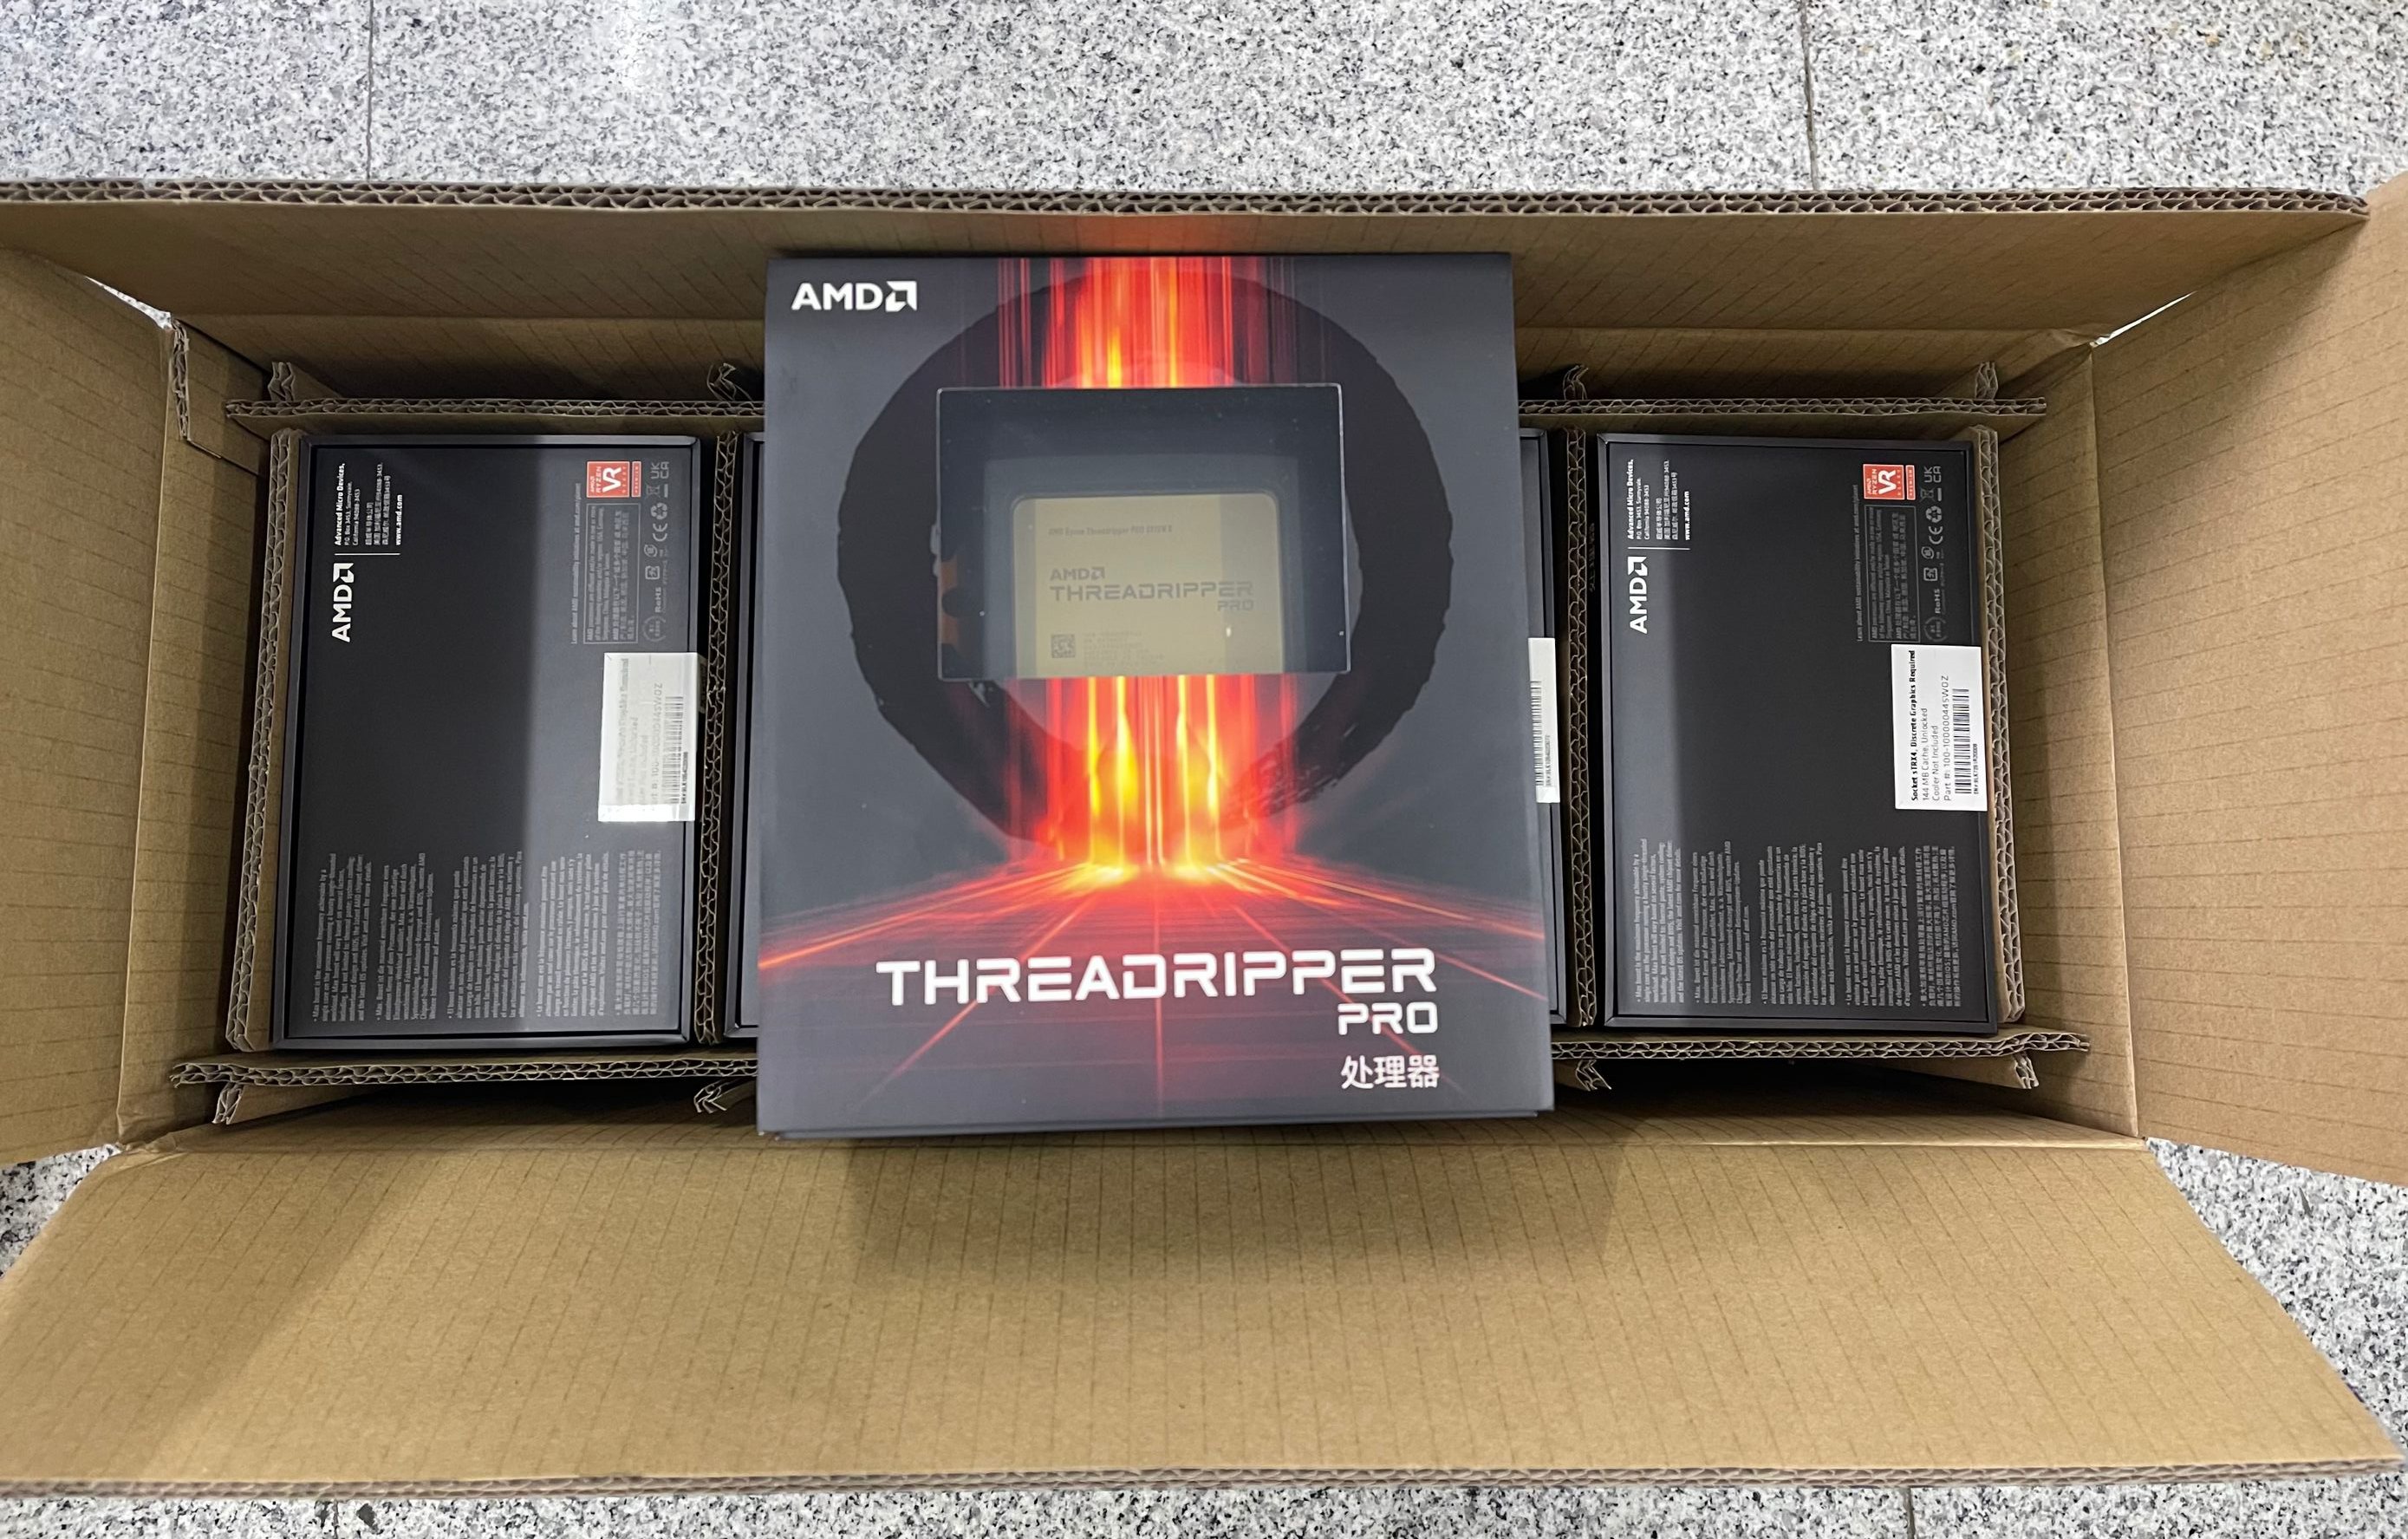 Media asset in full size related to 3dfxzone.it news item entitled as follows: Le CPU AMD Ryzen Threadripper PRO 5000WX nel mercato DIY cinese: i prezzi | Image Name: news33422_Ryzen-Threadripper-PRO-5000WX_1.jpg